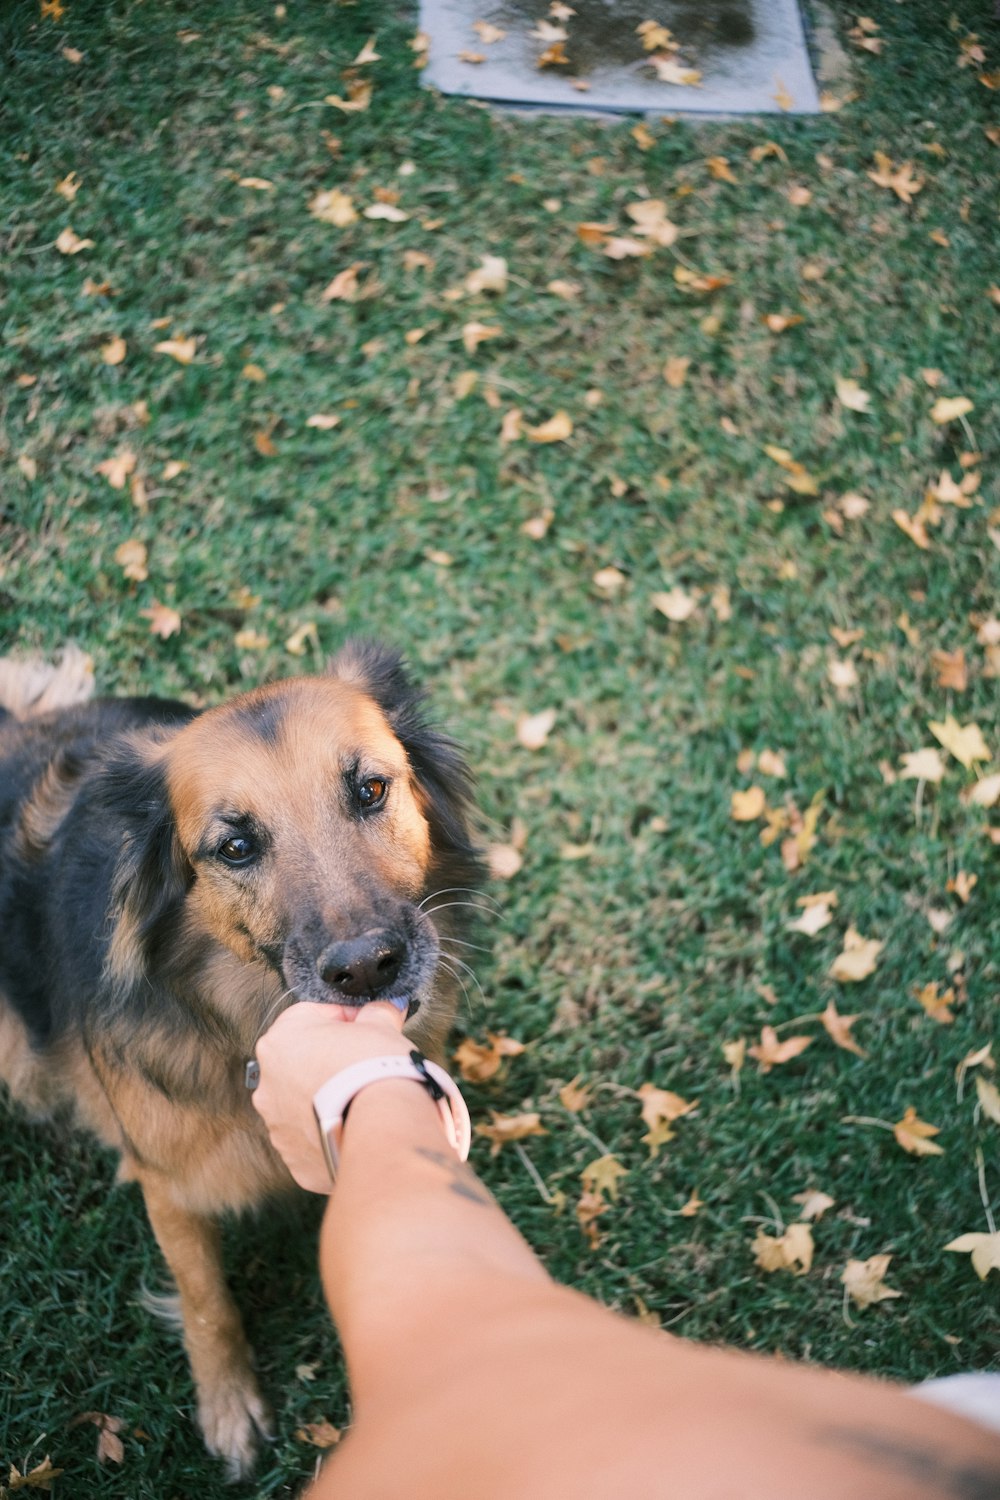 a person holding a dog's hand in the grass